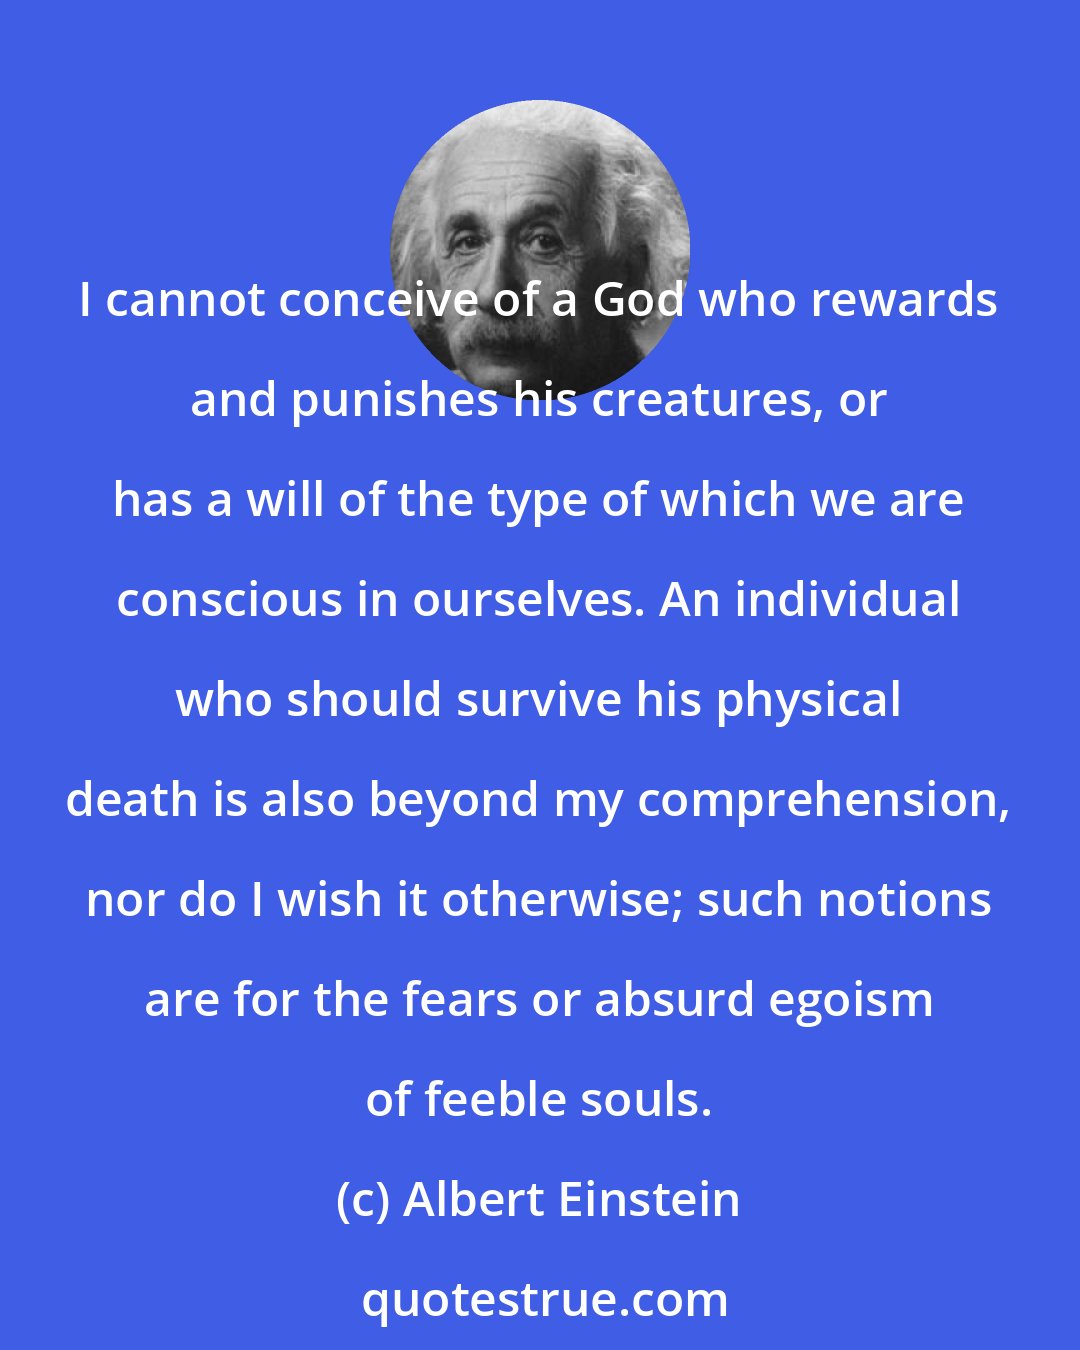 Albert Einstein: I cannot conceive of a God who rewards and punishes his creatures, or has a will of the type of which we are conscious in ourselves. An individual who should survive his physical death is also beyond my comprehension, nor do I wish it otherwise; such notions are for the fears or absurd egoism of feeble souls.